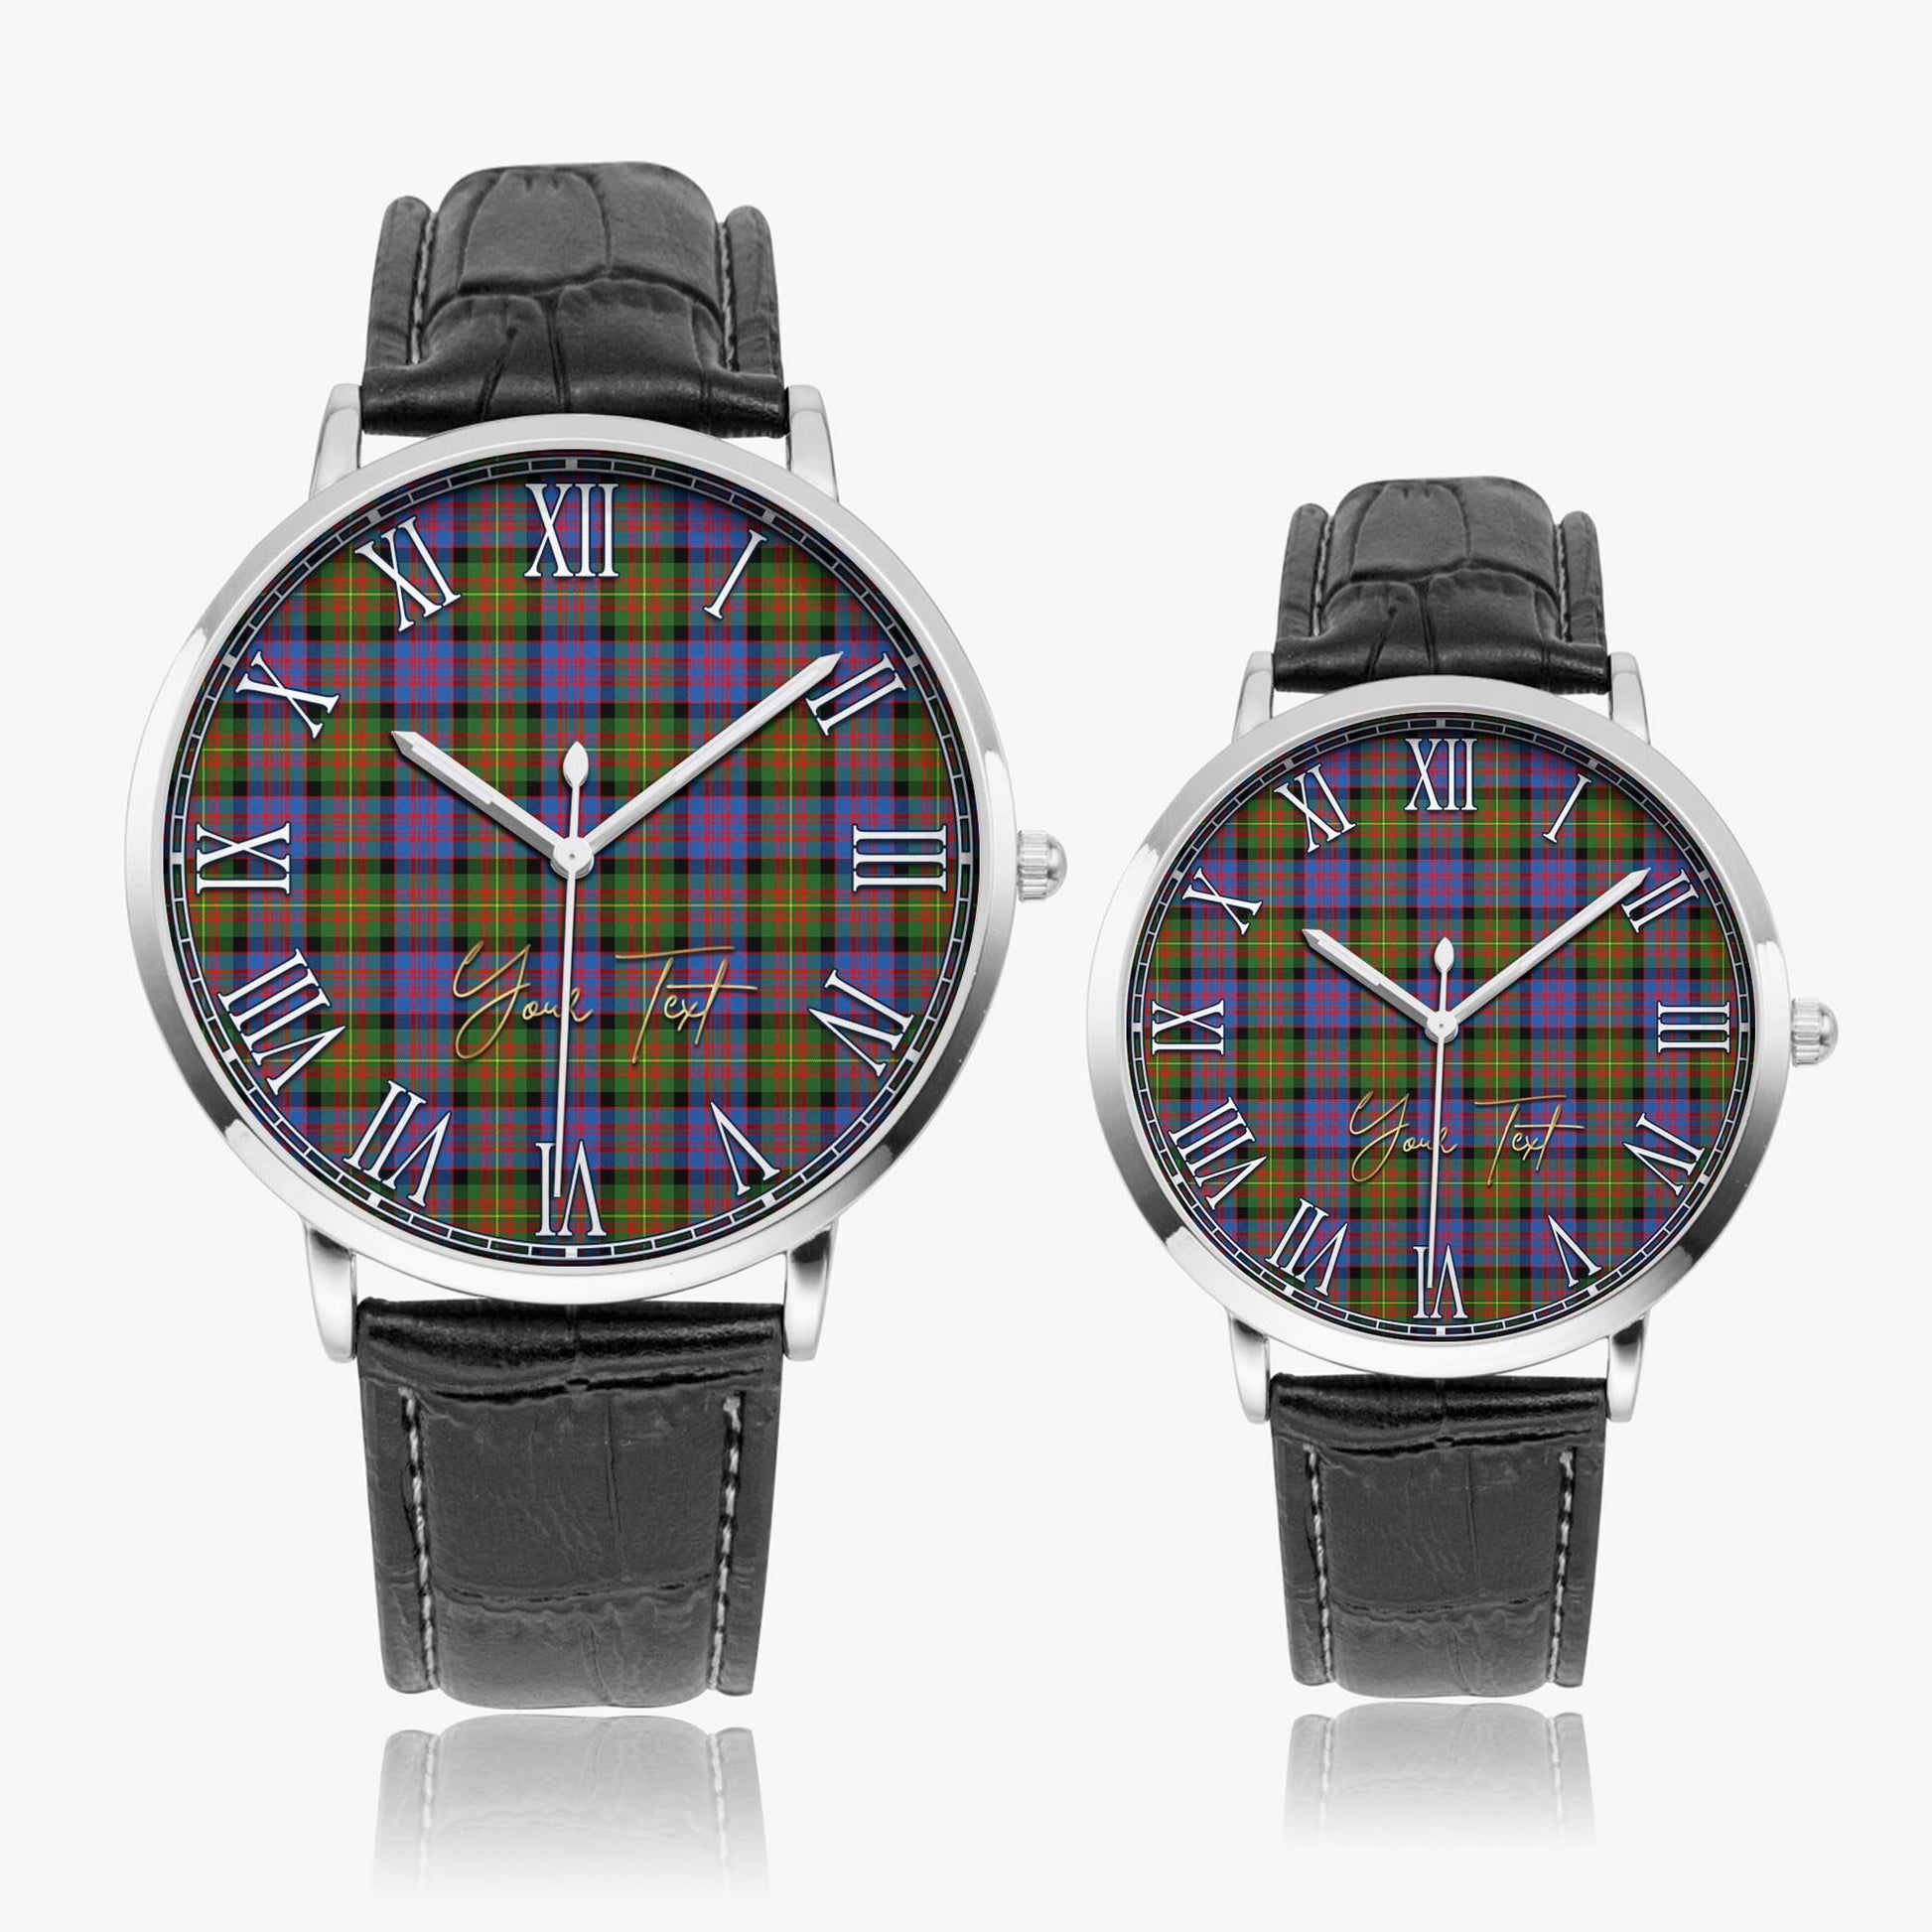 Carnegie Ancient Tartan Personalized Your Text Leather Trap Quartz Watch Ultra Thin Silver Case With Black Leather Strap - Tartanvibesclothing